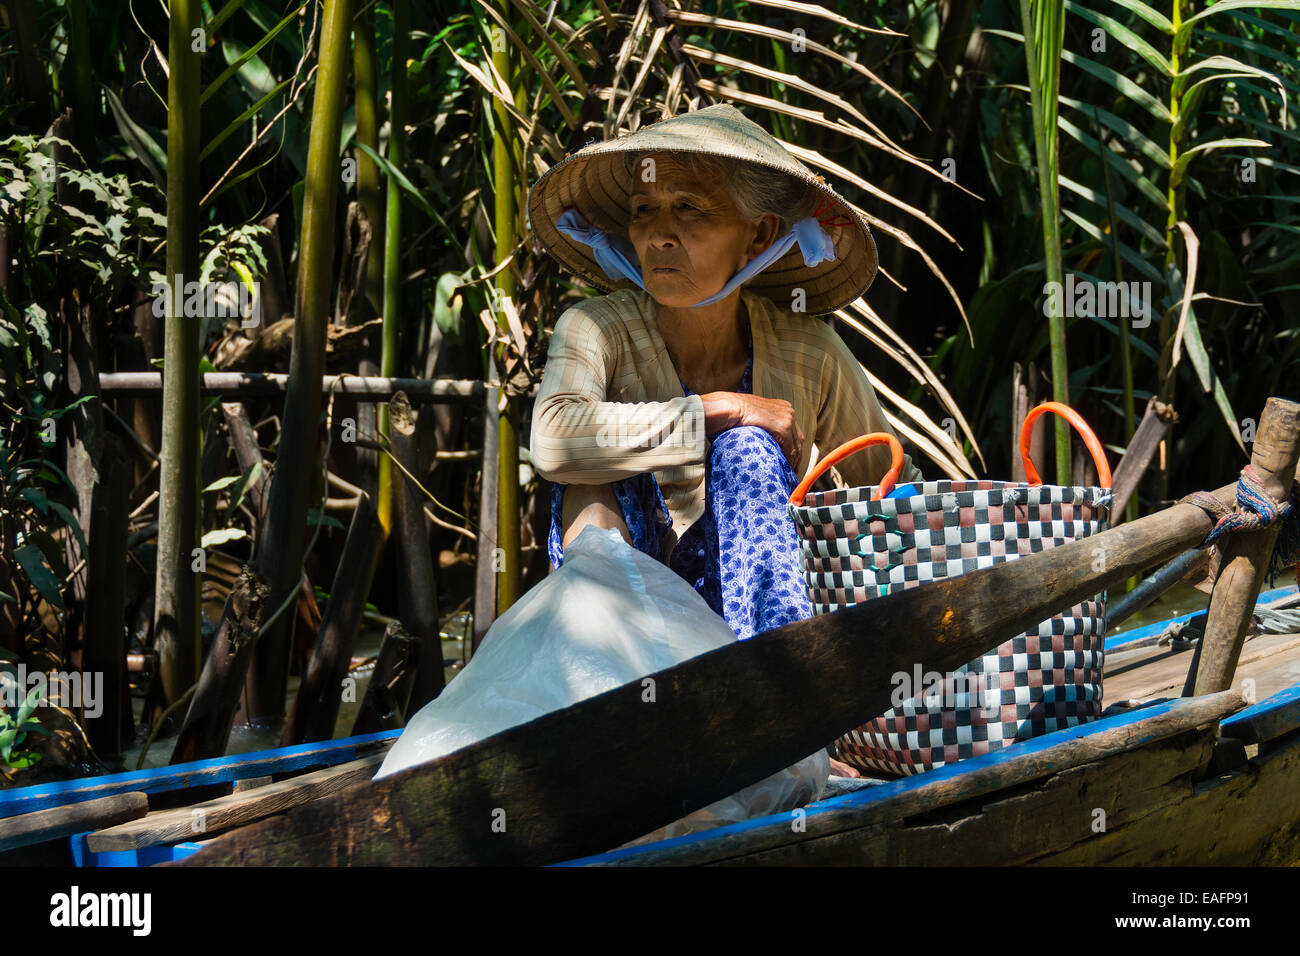 Vietnamese elderly woman seated in a traditional boat on Mekong River Stock Photo